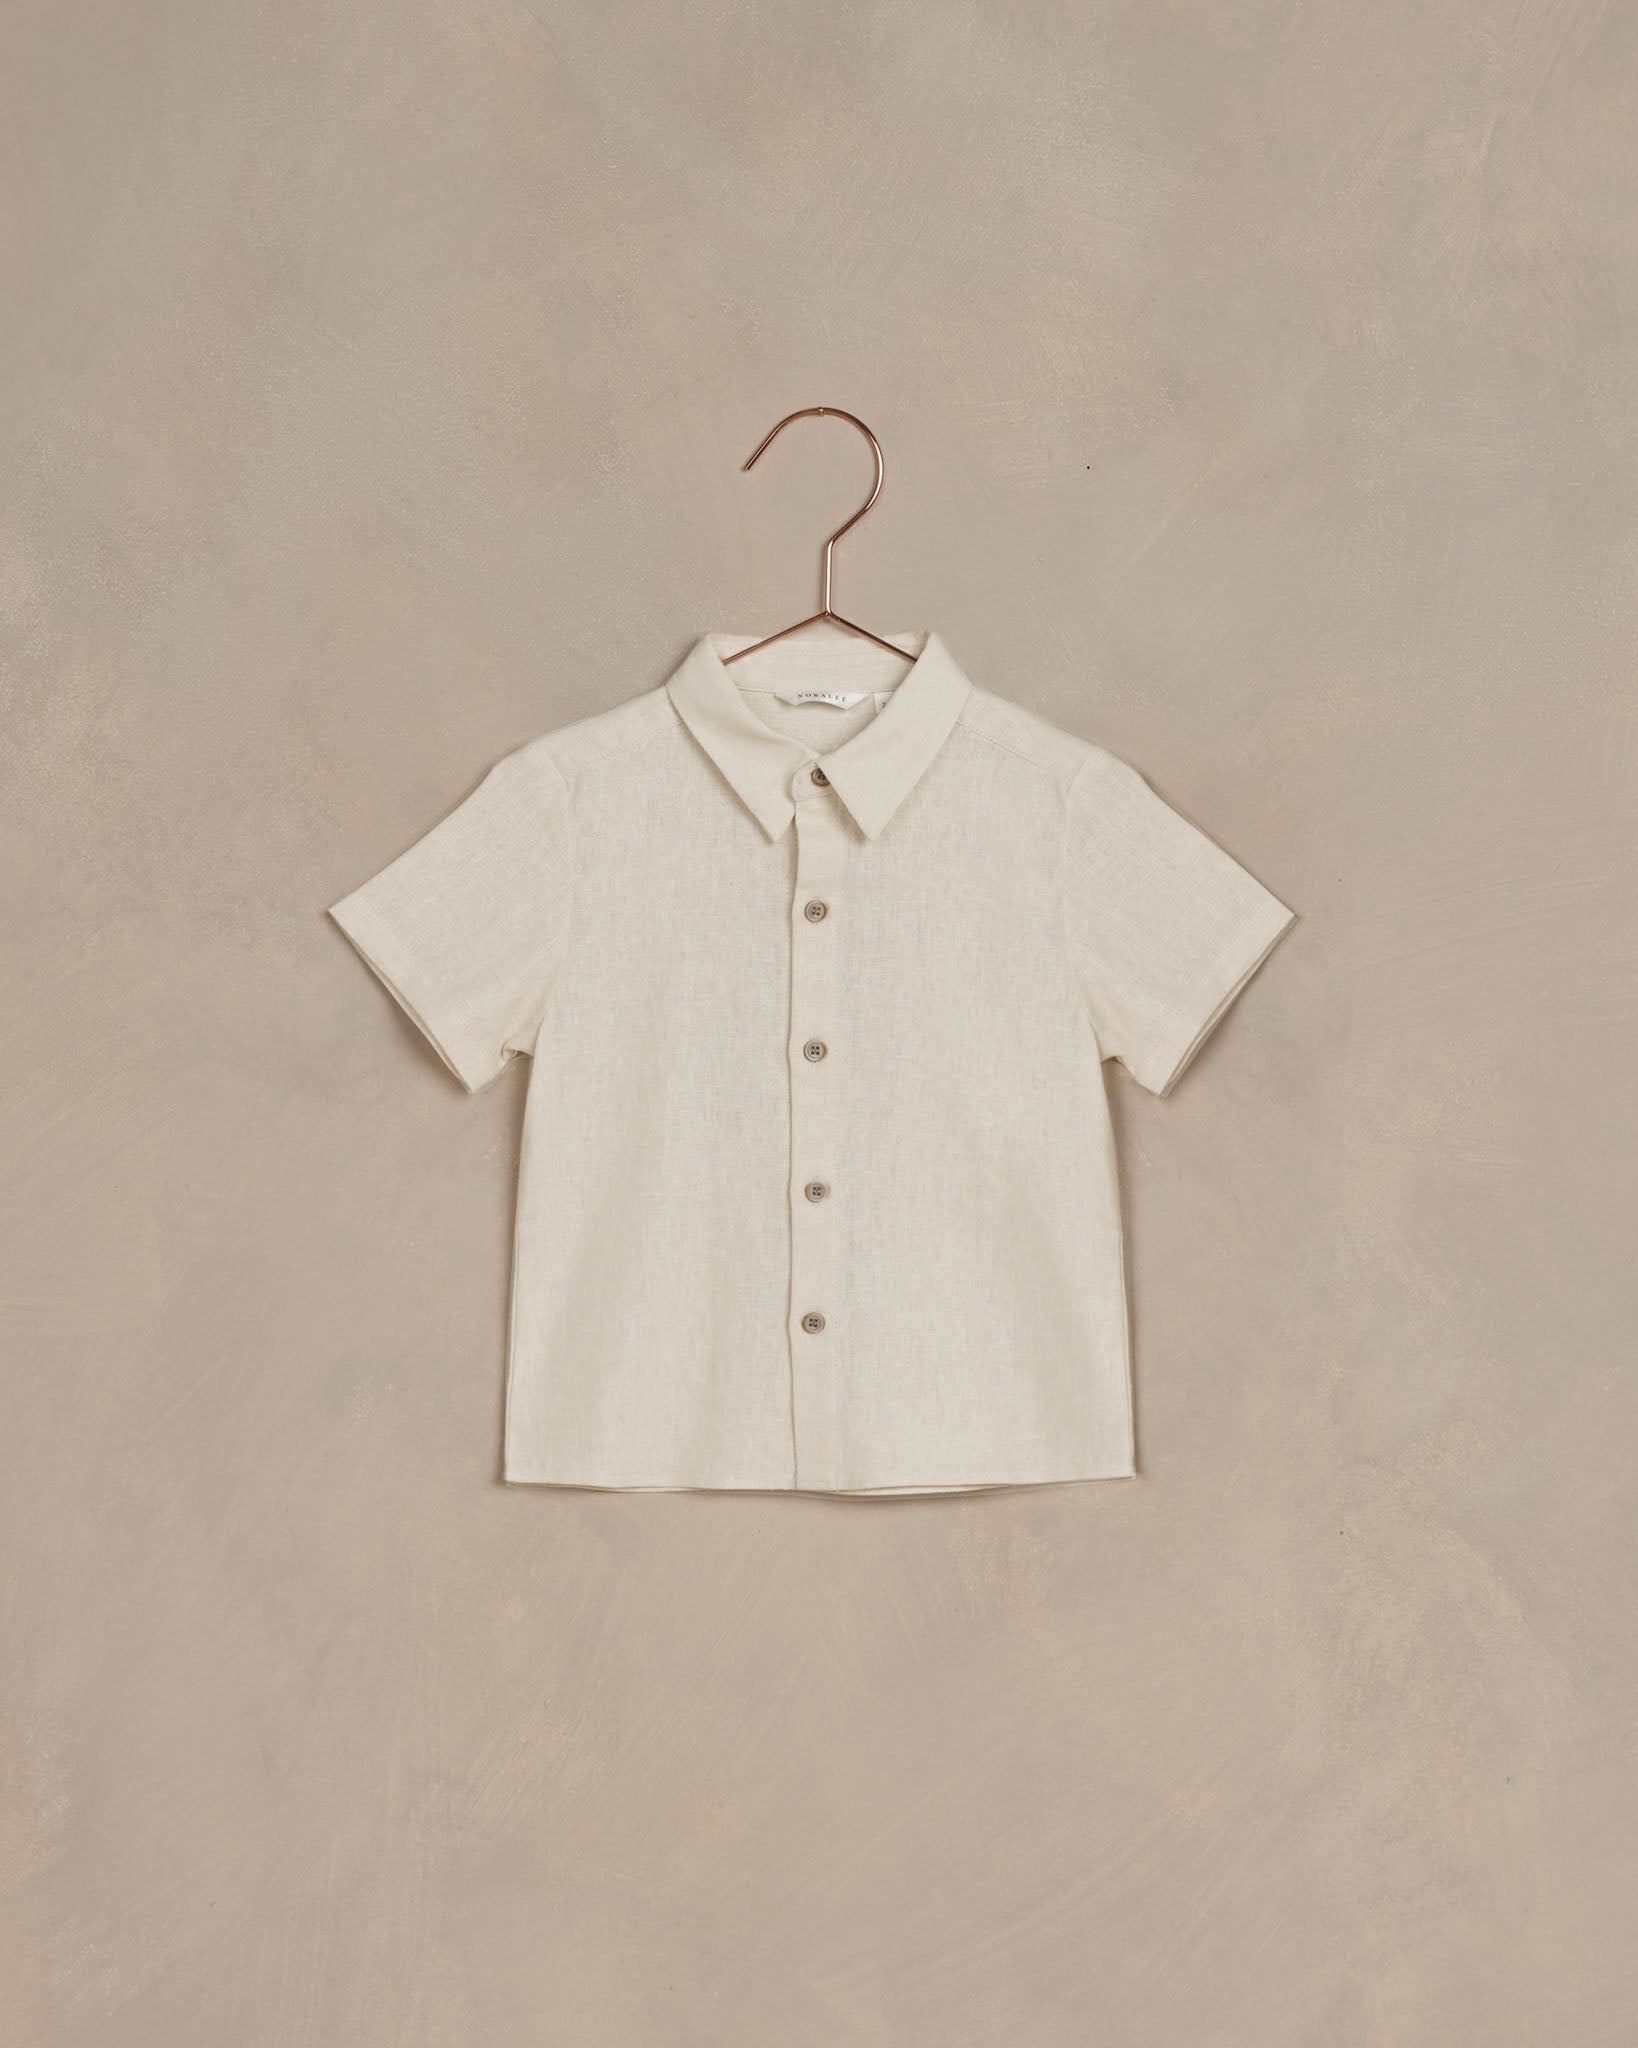 Atlas Shirt || Ivory - Rylee + Cru | Kids Clothes | Trendy Baby Clothes | Modern Infant Outfits |